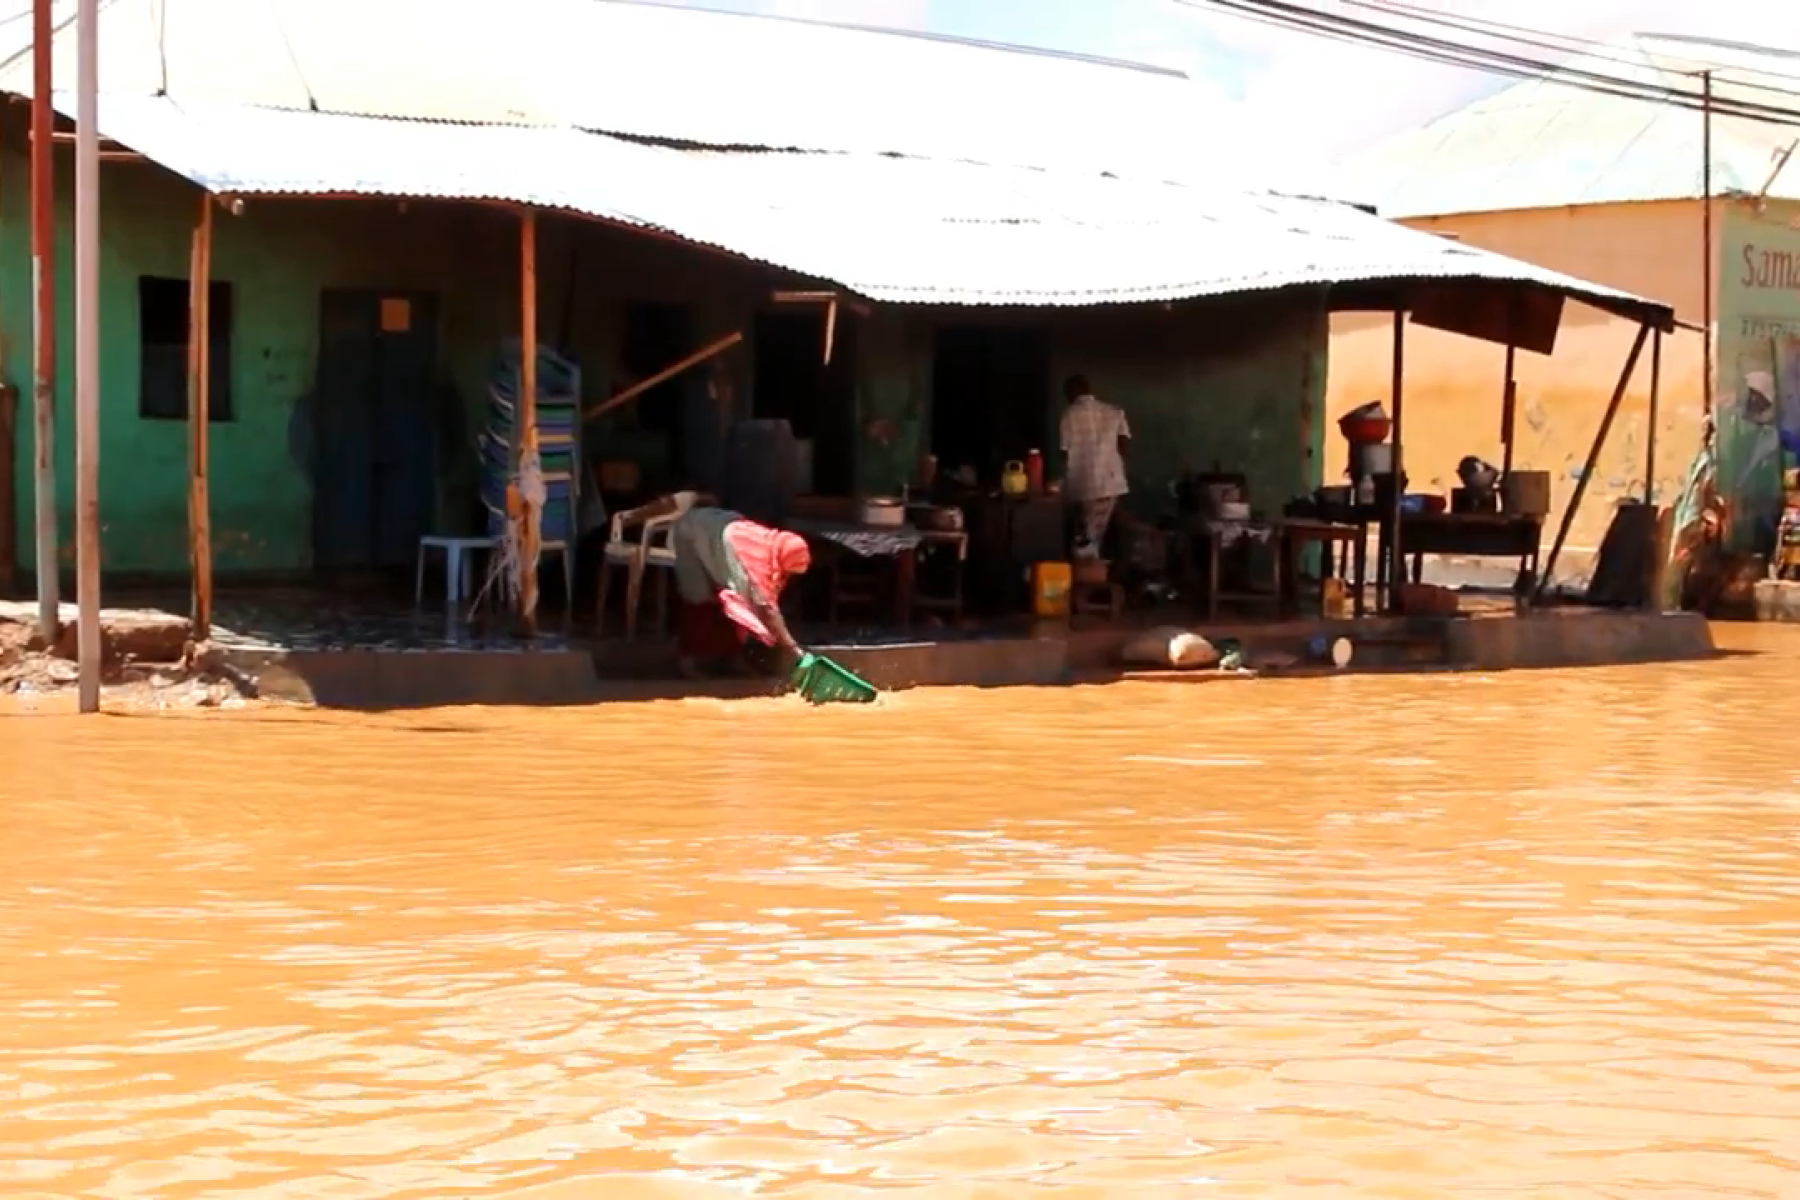 A Year After the Floods In Qardho: What Has Been The Response And How Is The Community Coping?